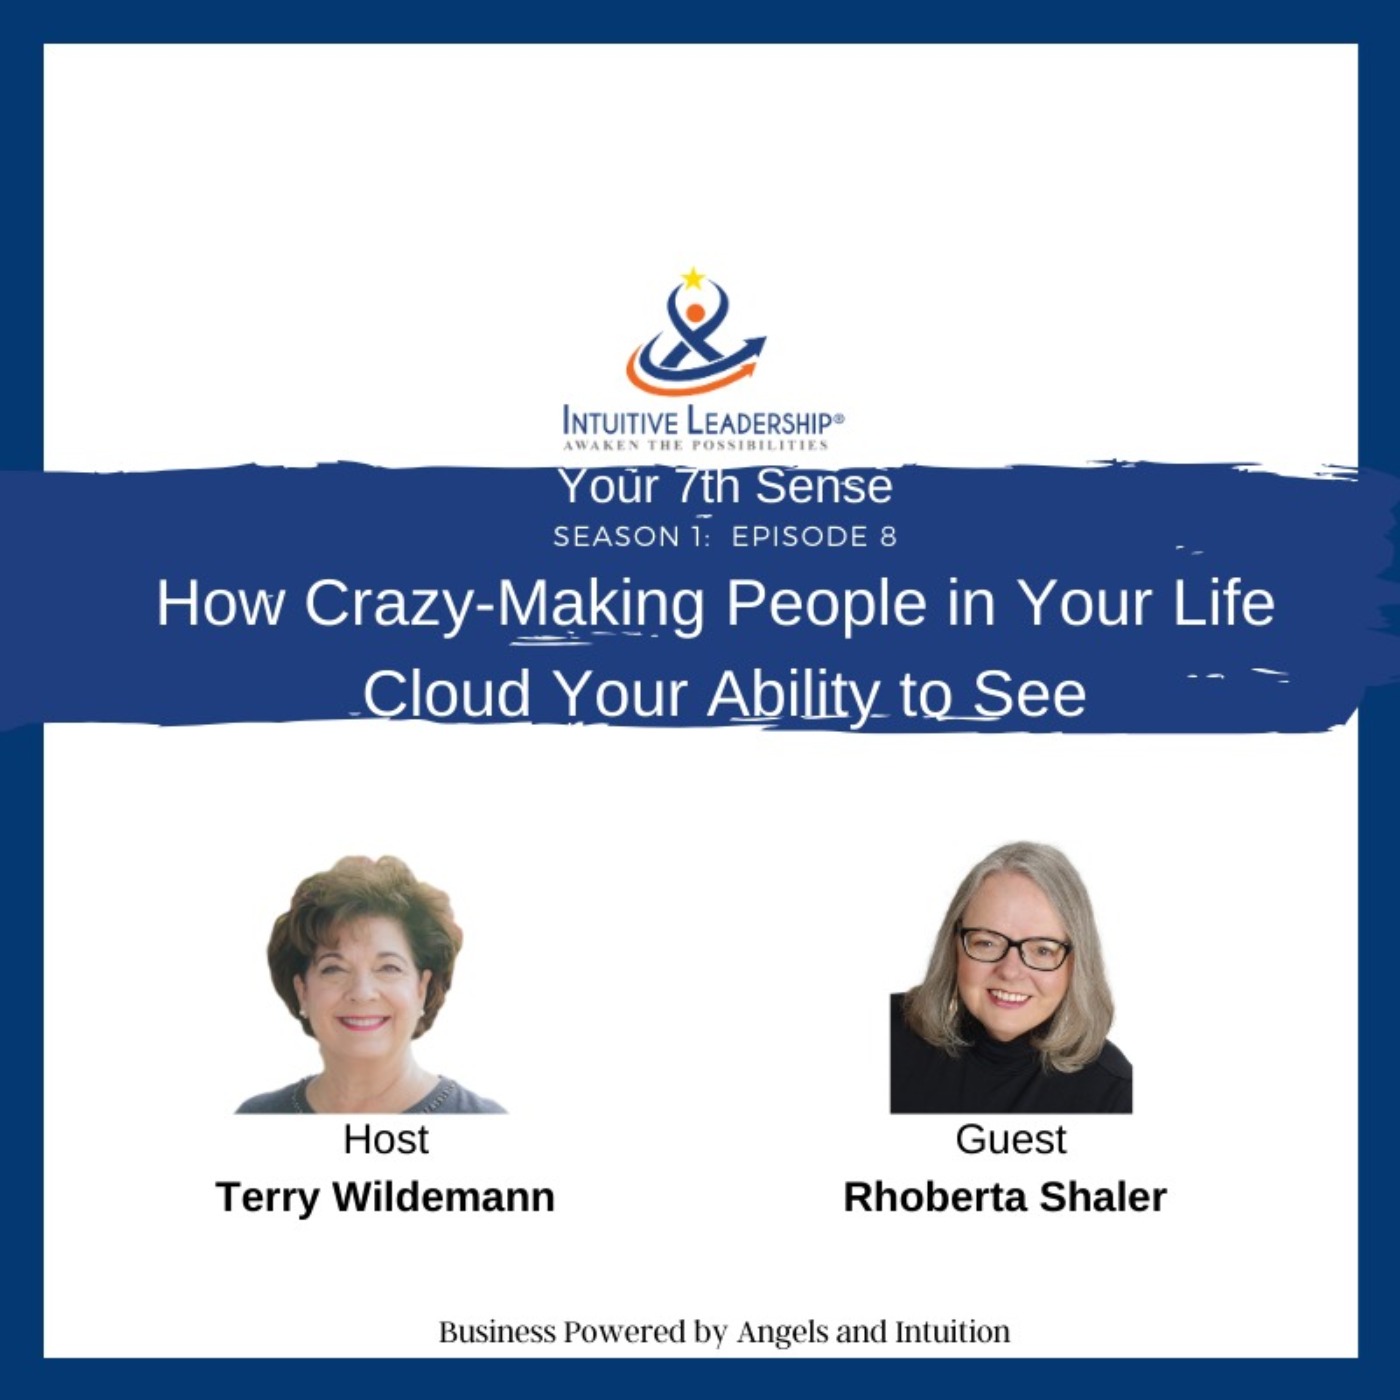 Your 7th Sense: How Crazy-Making People in Your Life Cloud Your Ability to See